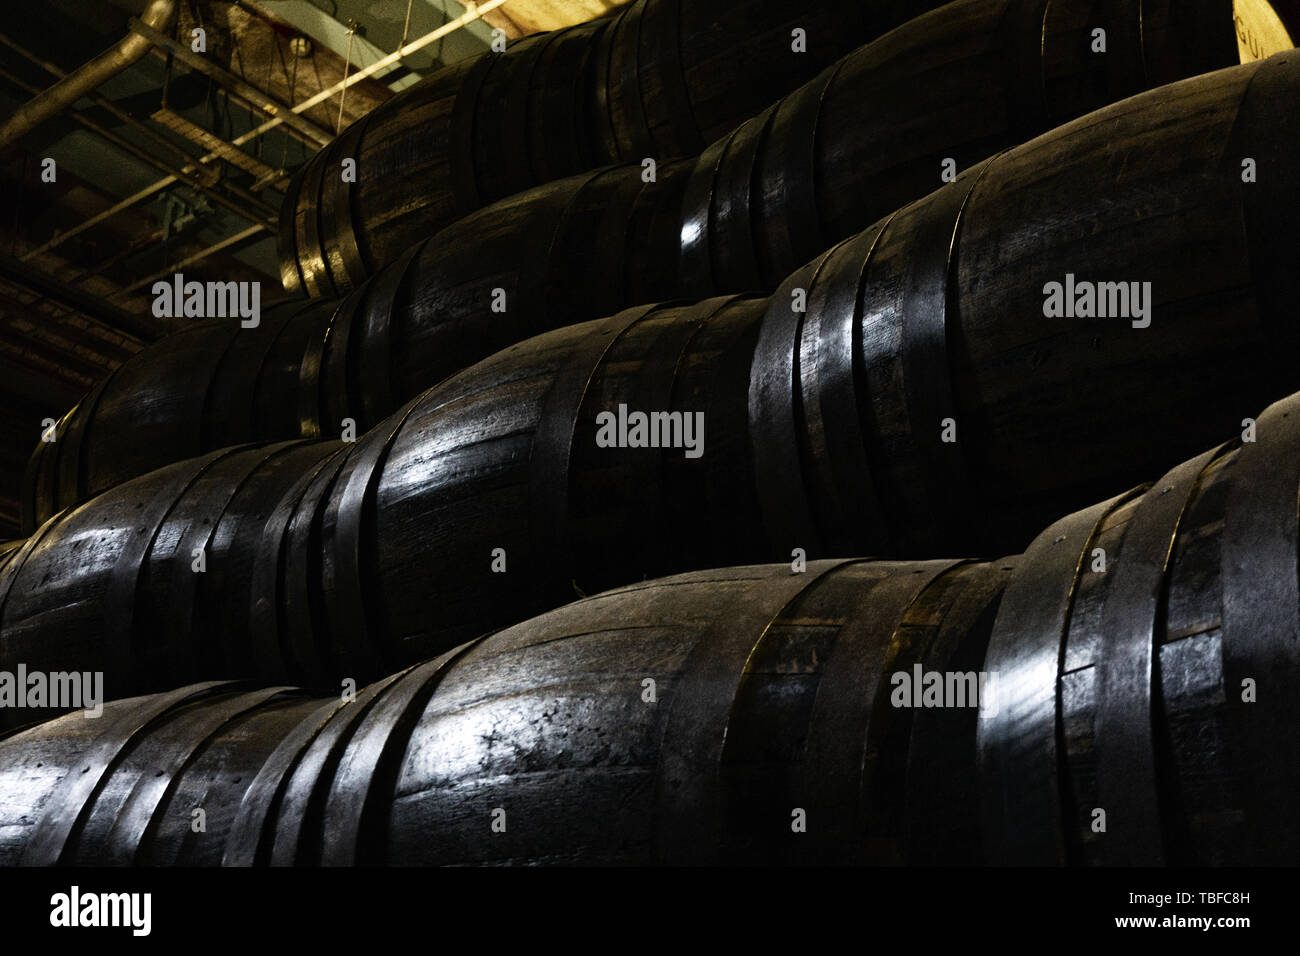 old wooden barrels for whiskey or wine stacked in the cellar Stock Photo